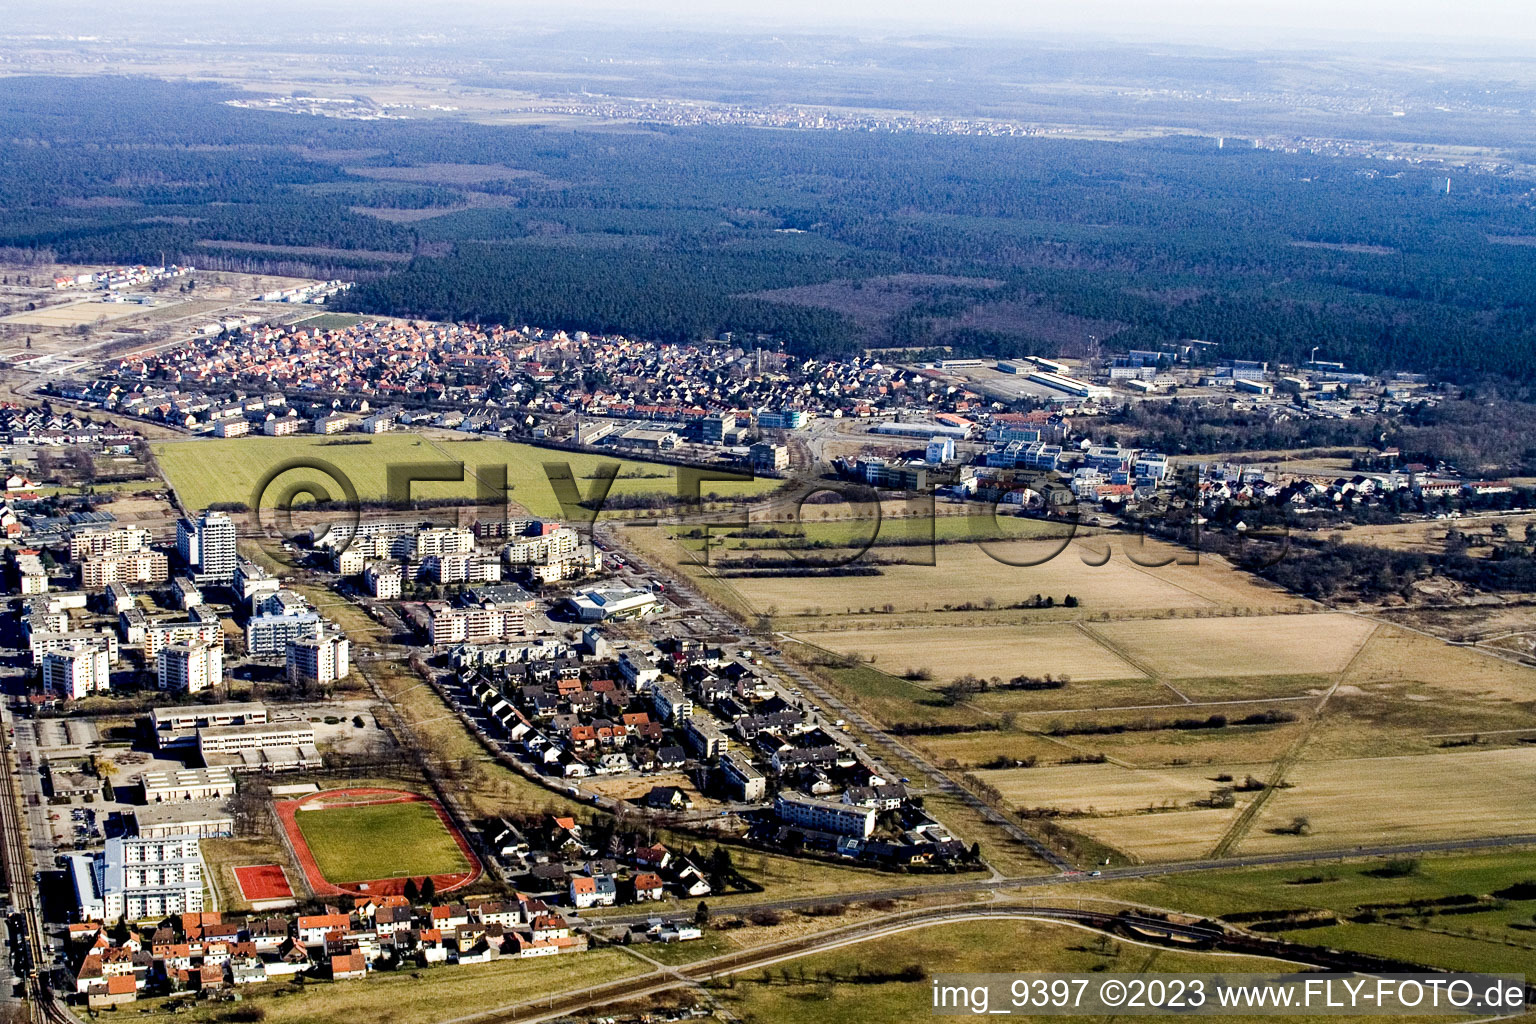 From the south in the district Neureut in Karlsruhe in the state Baden-Wuerttemberg, Germany from above